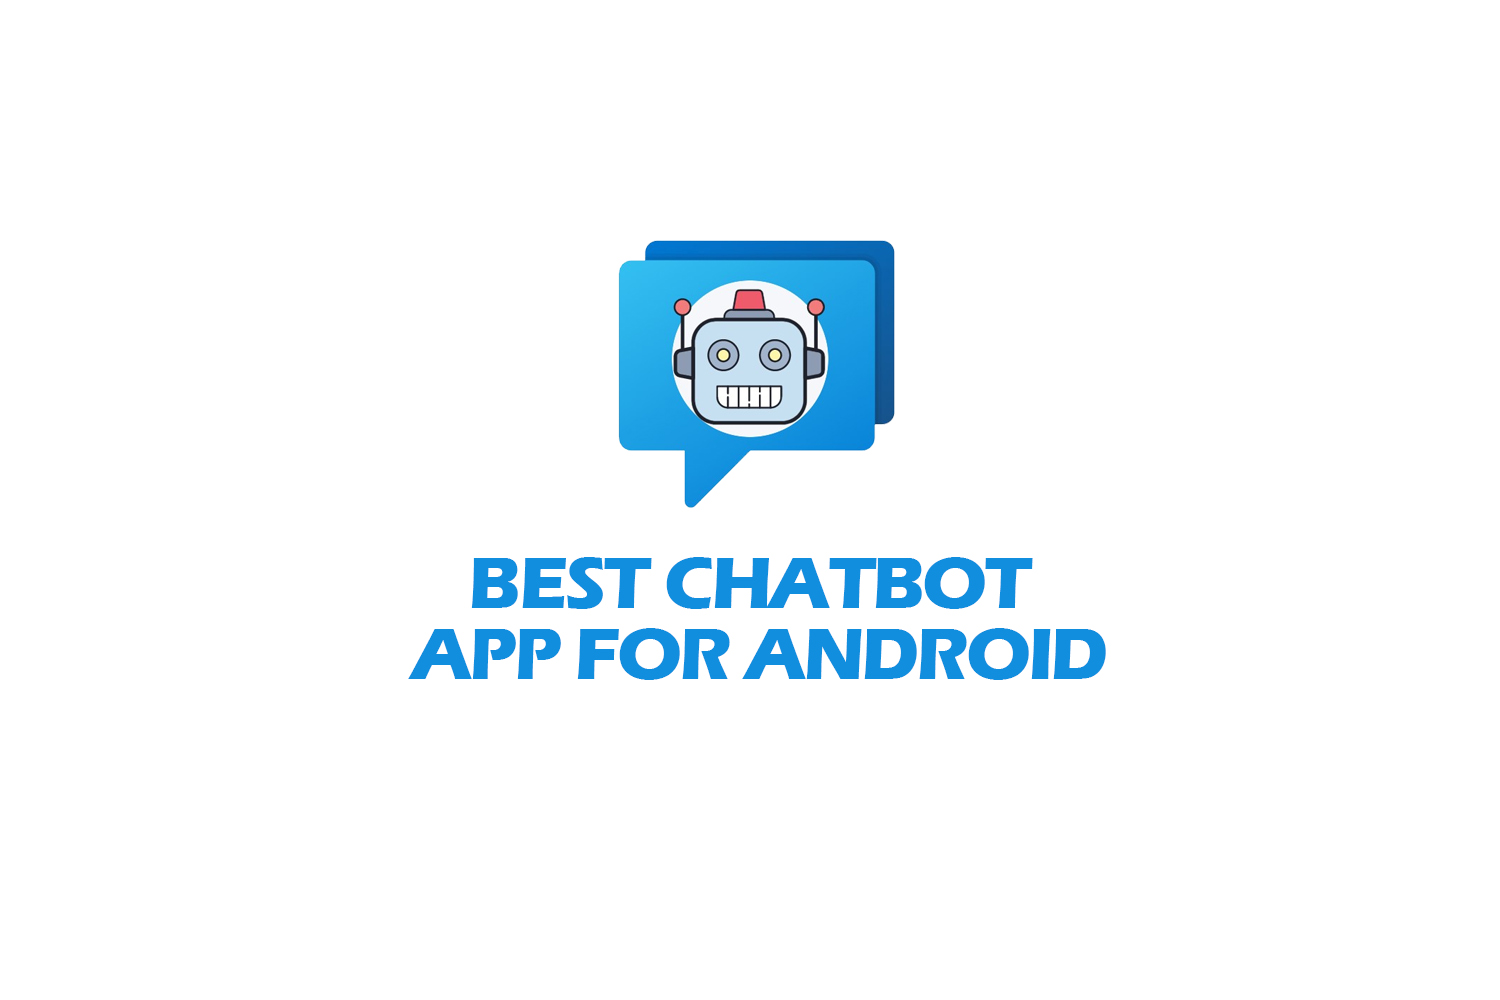 Best Chatbot App For Android